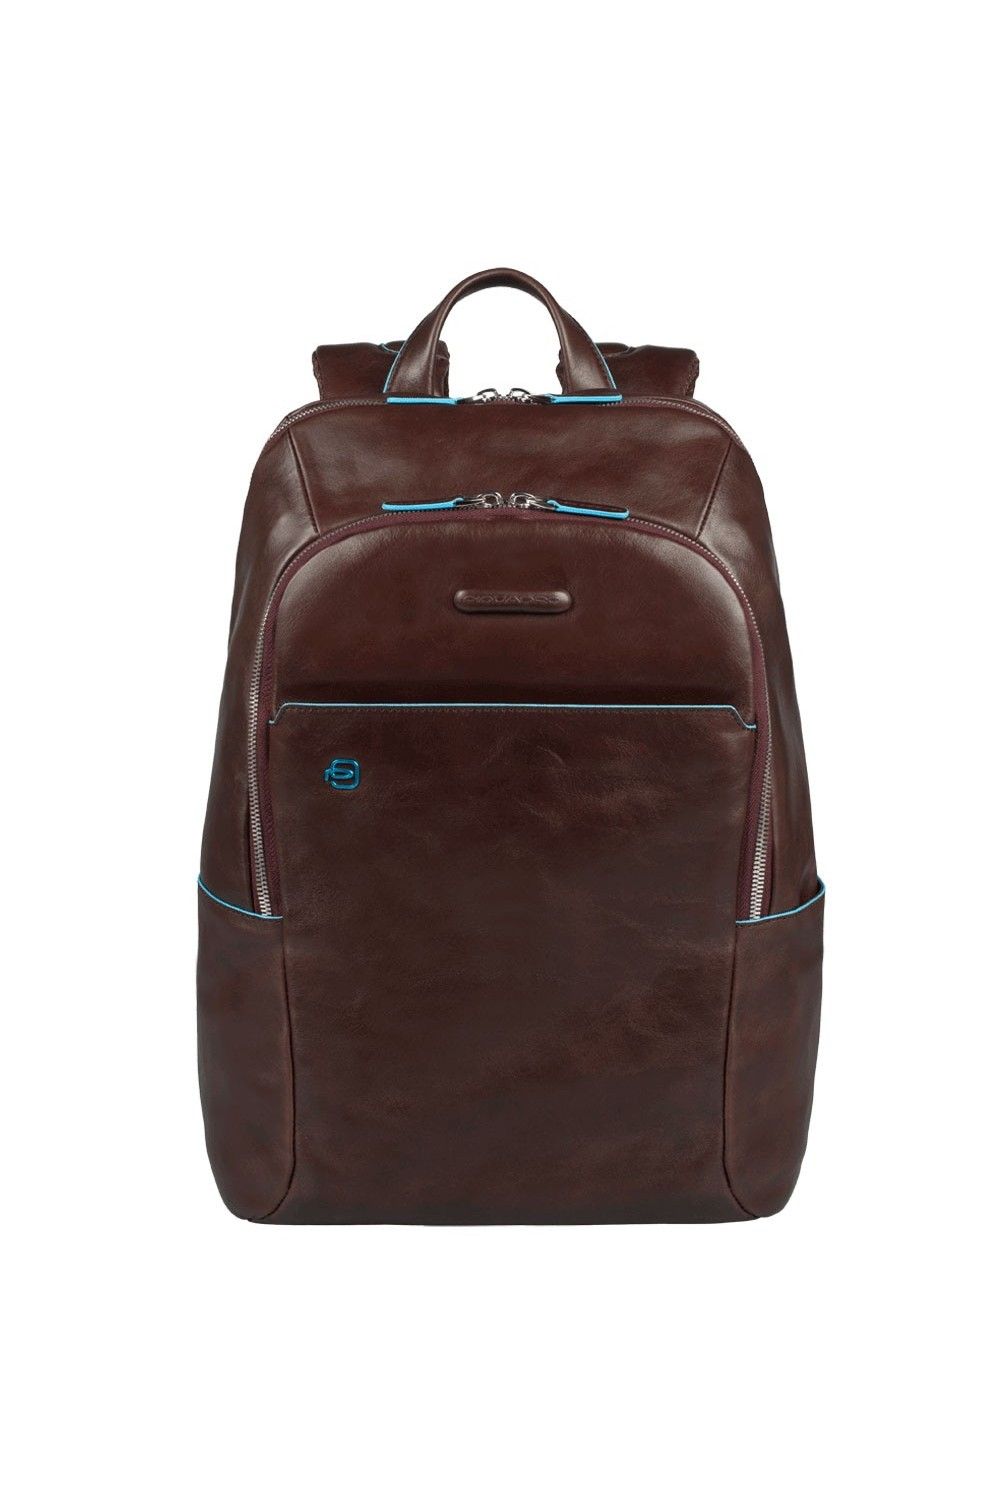 Laptop backpack Piquadro Blue Square 14 inches